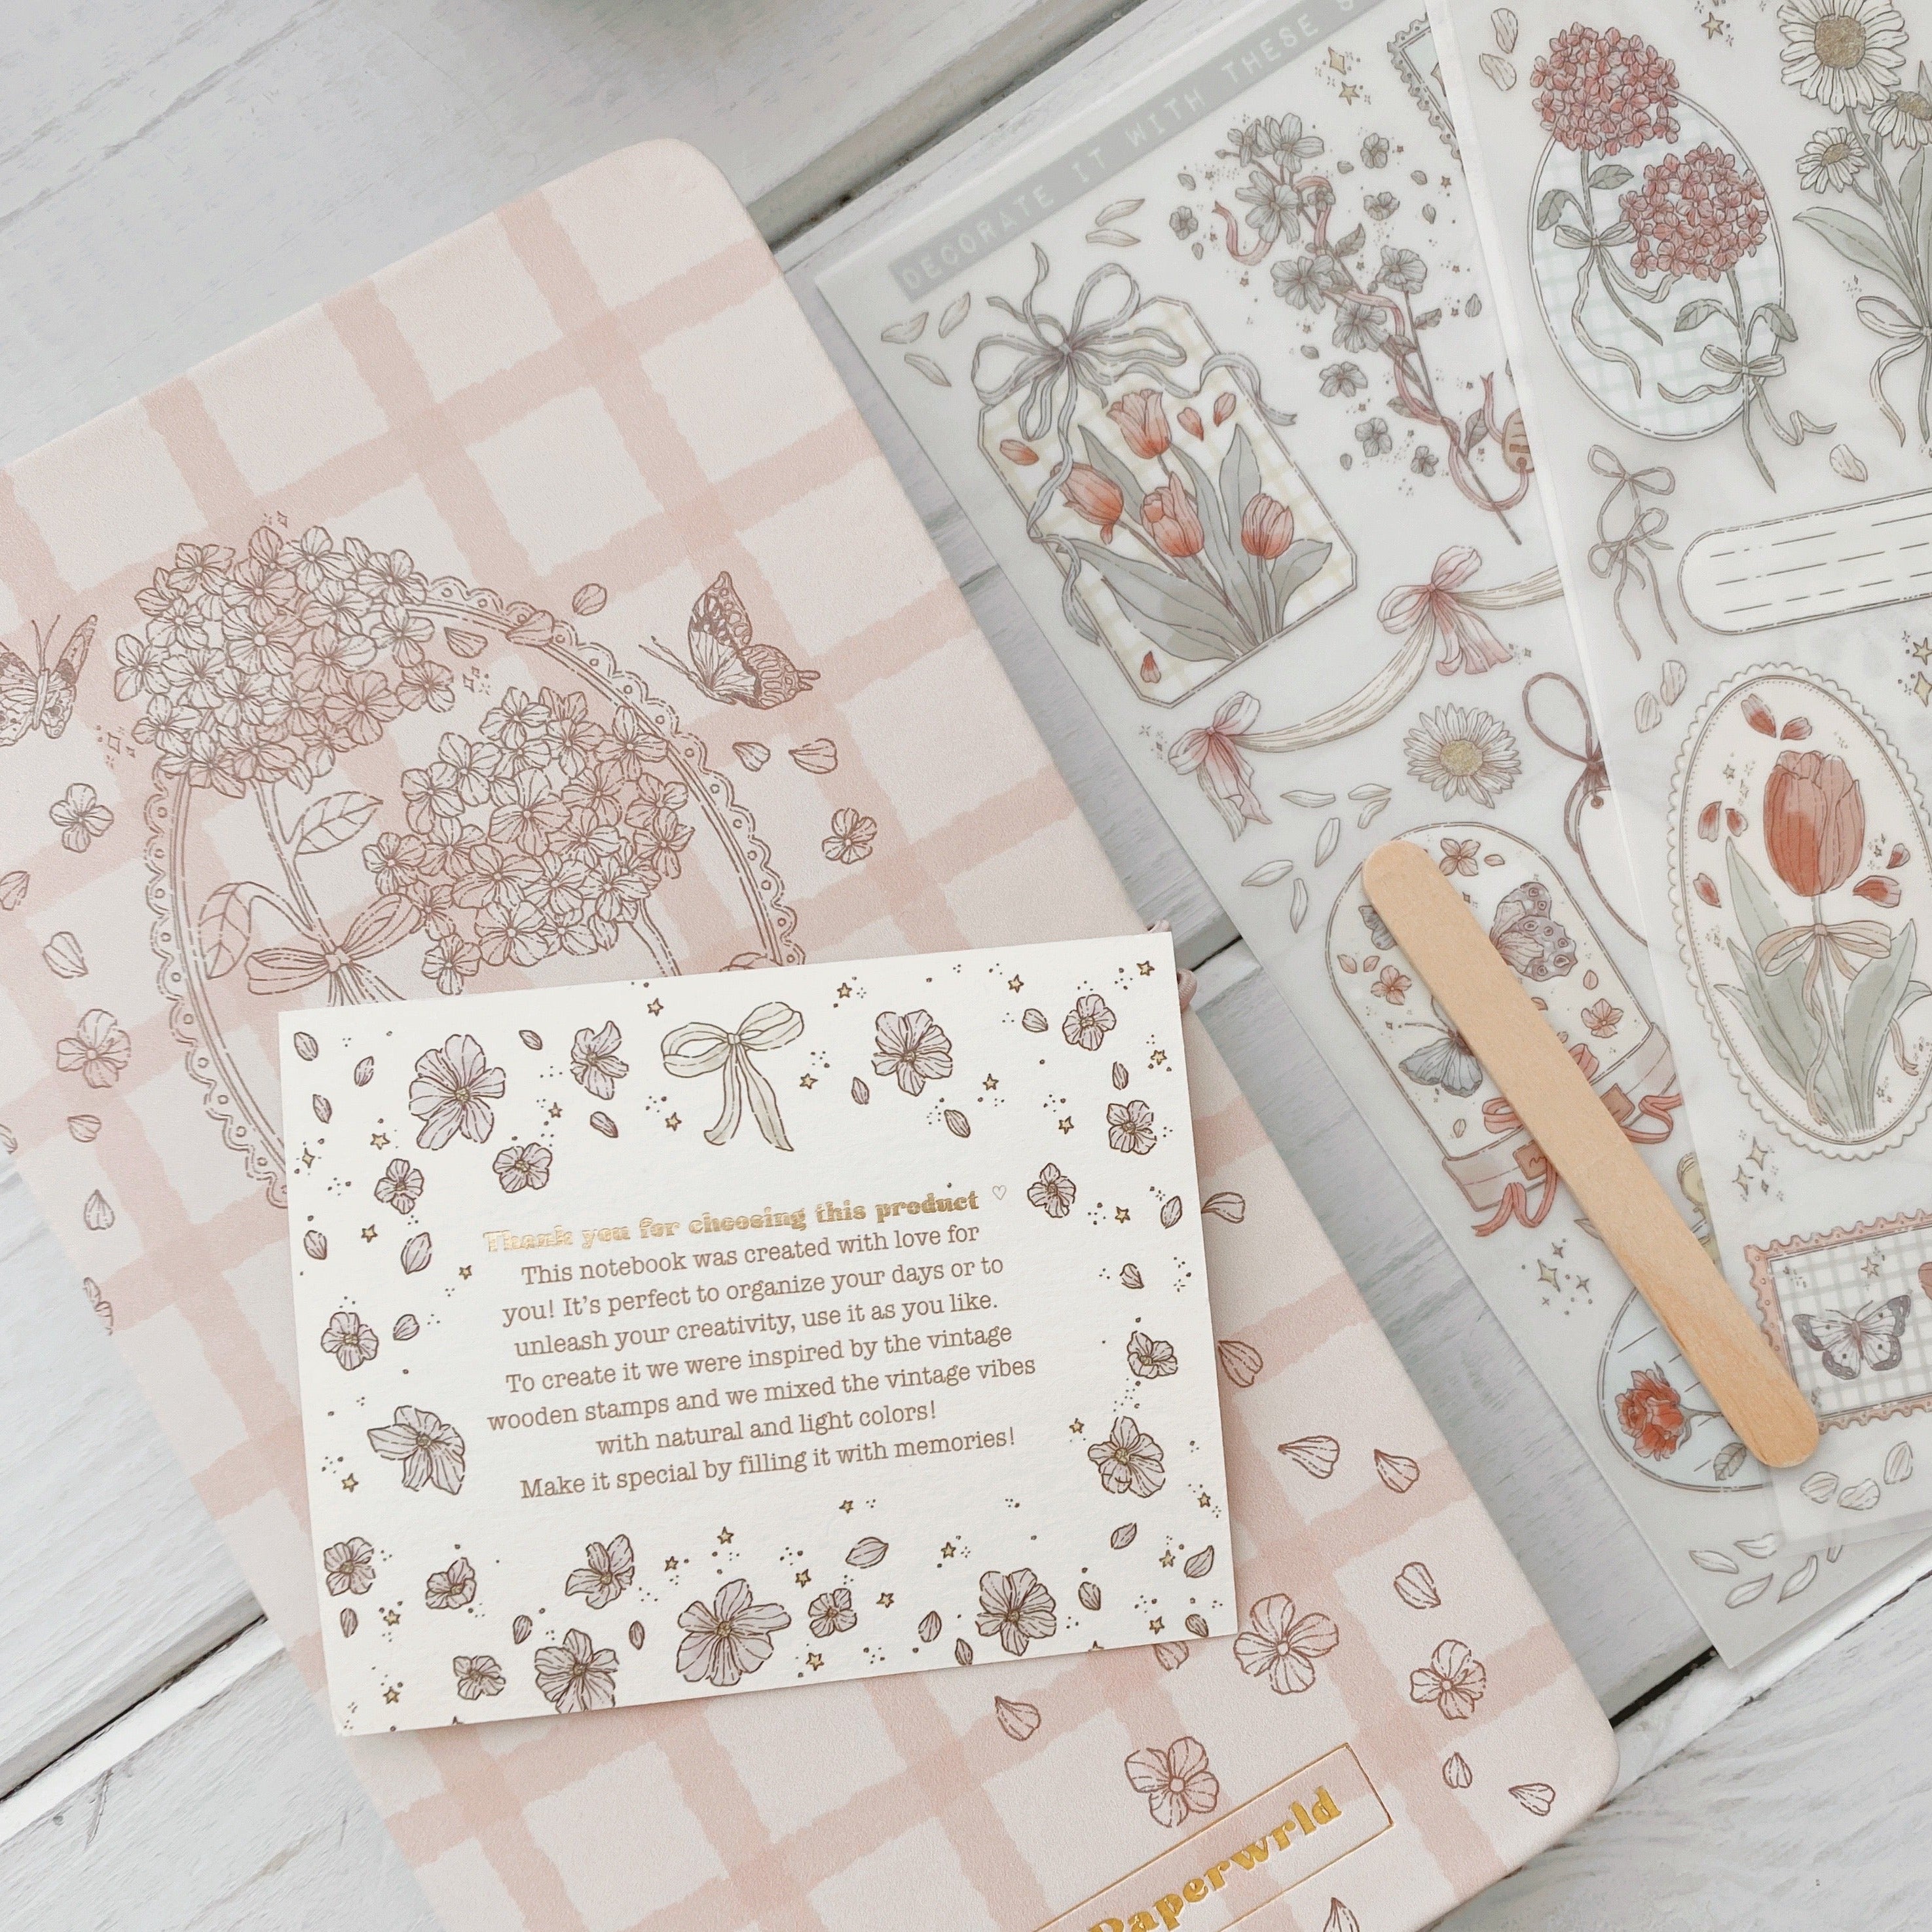 The Fairytale Journal – A Feebujo x PaperWrld Collaboration